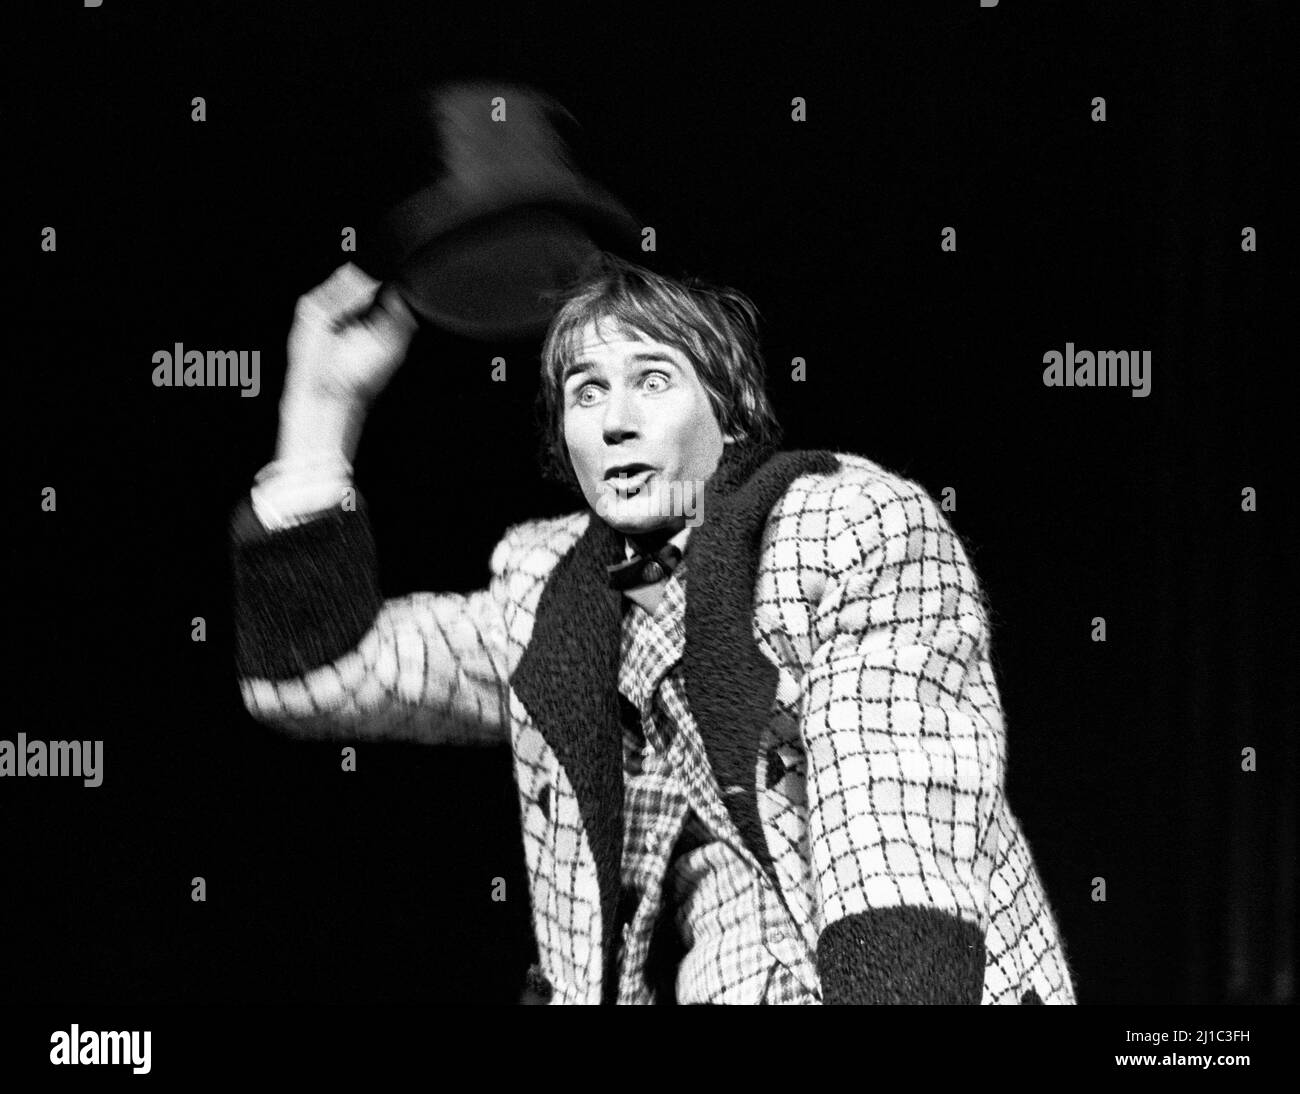 Jim Dale (Denry Machin) in THE CARD at the Queen’s Theatre, London W1  24/07/1973  music & lyrics: Tony Hatch & Jackie Trent  book: Keith Waterhouse & Willis Hall  after the novel by Arnold Bennett  design: Malcolm Pride  musical staging & choreography: Gillian Lynne  director: Val May Stock Photo